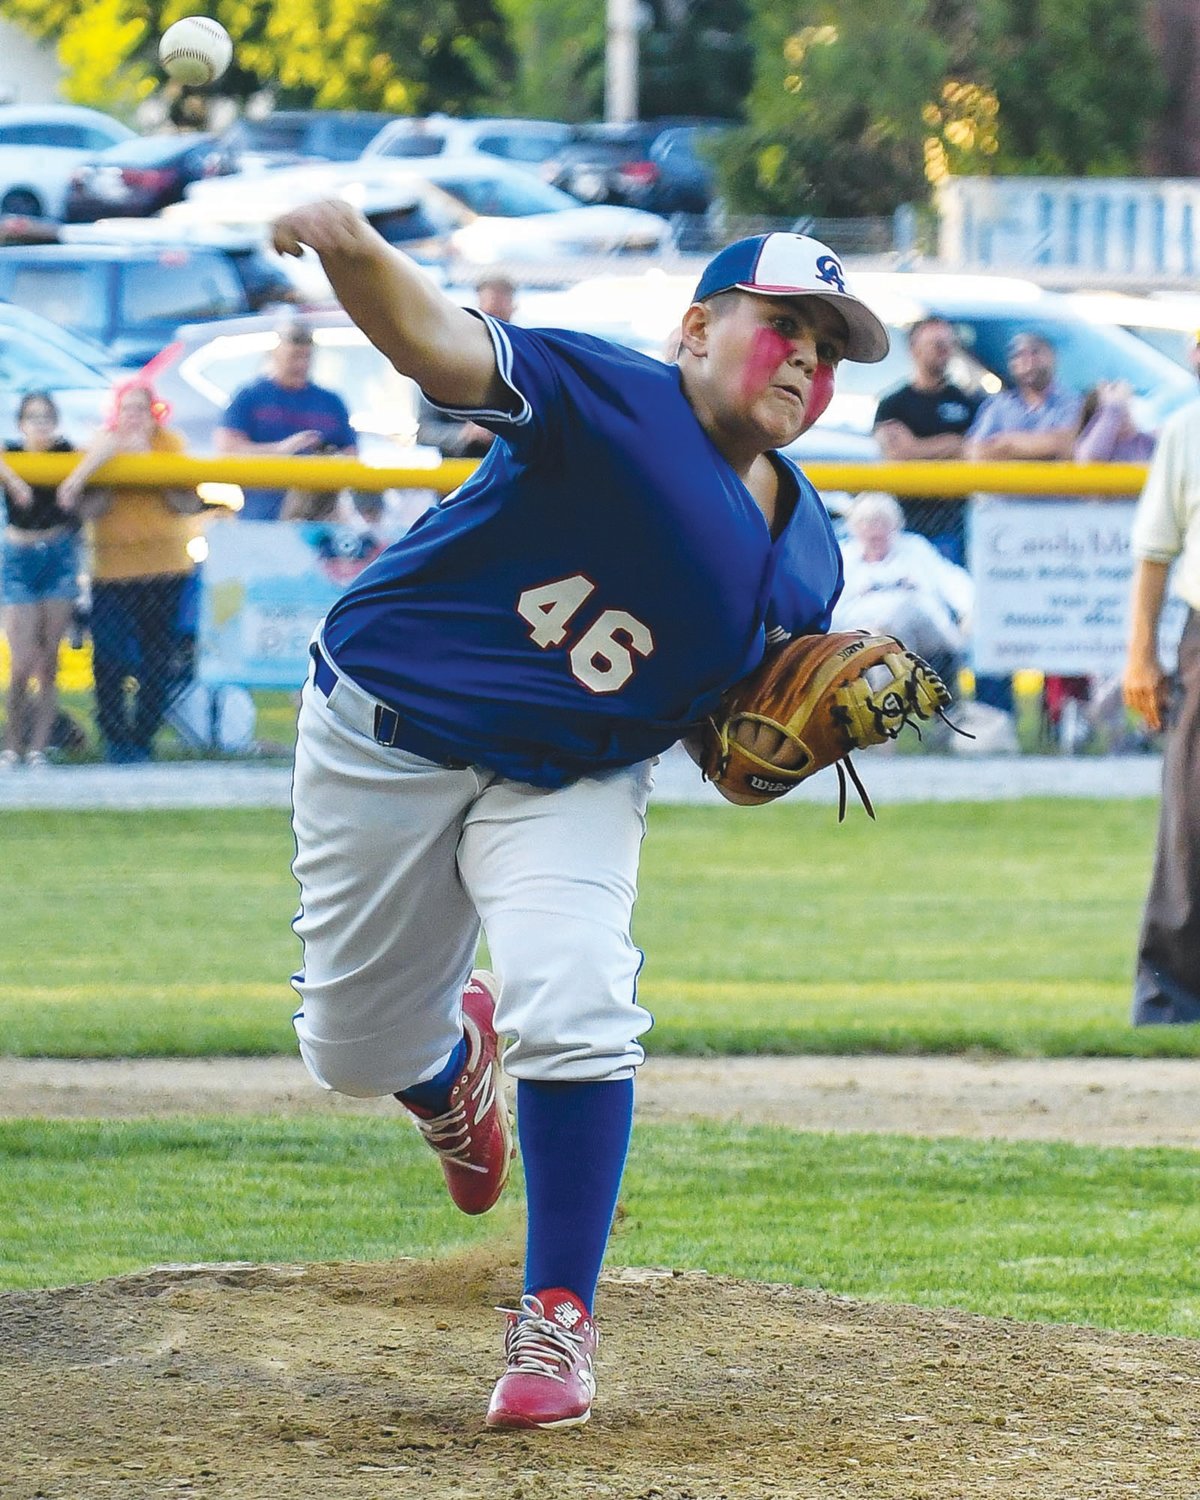 FIRE AWAY: WCA pitcher Drew McCaffrey delivering a pitch.